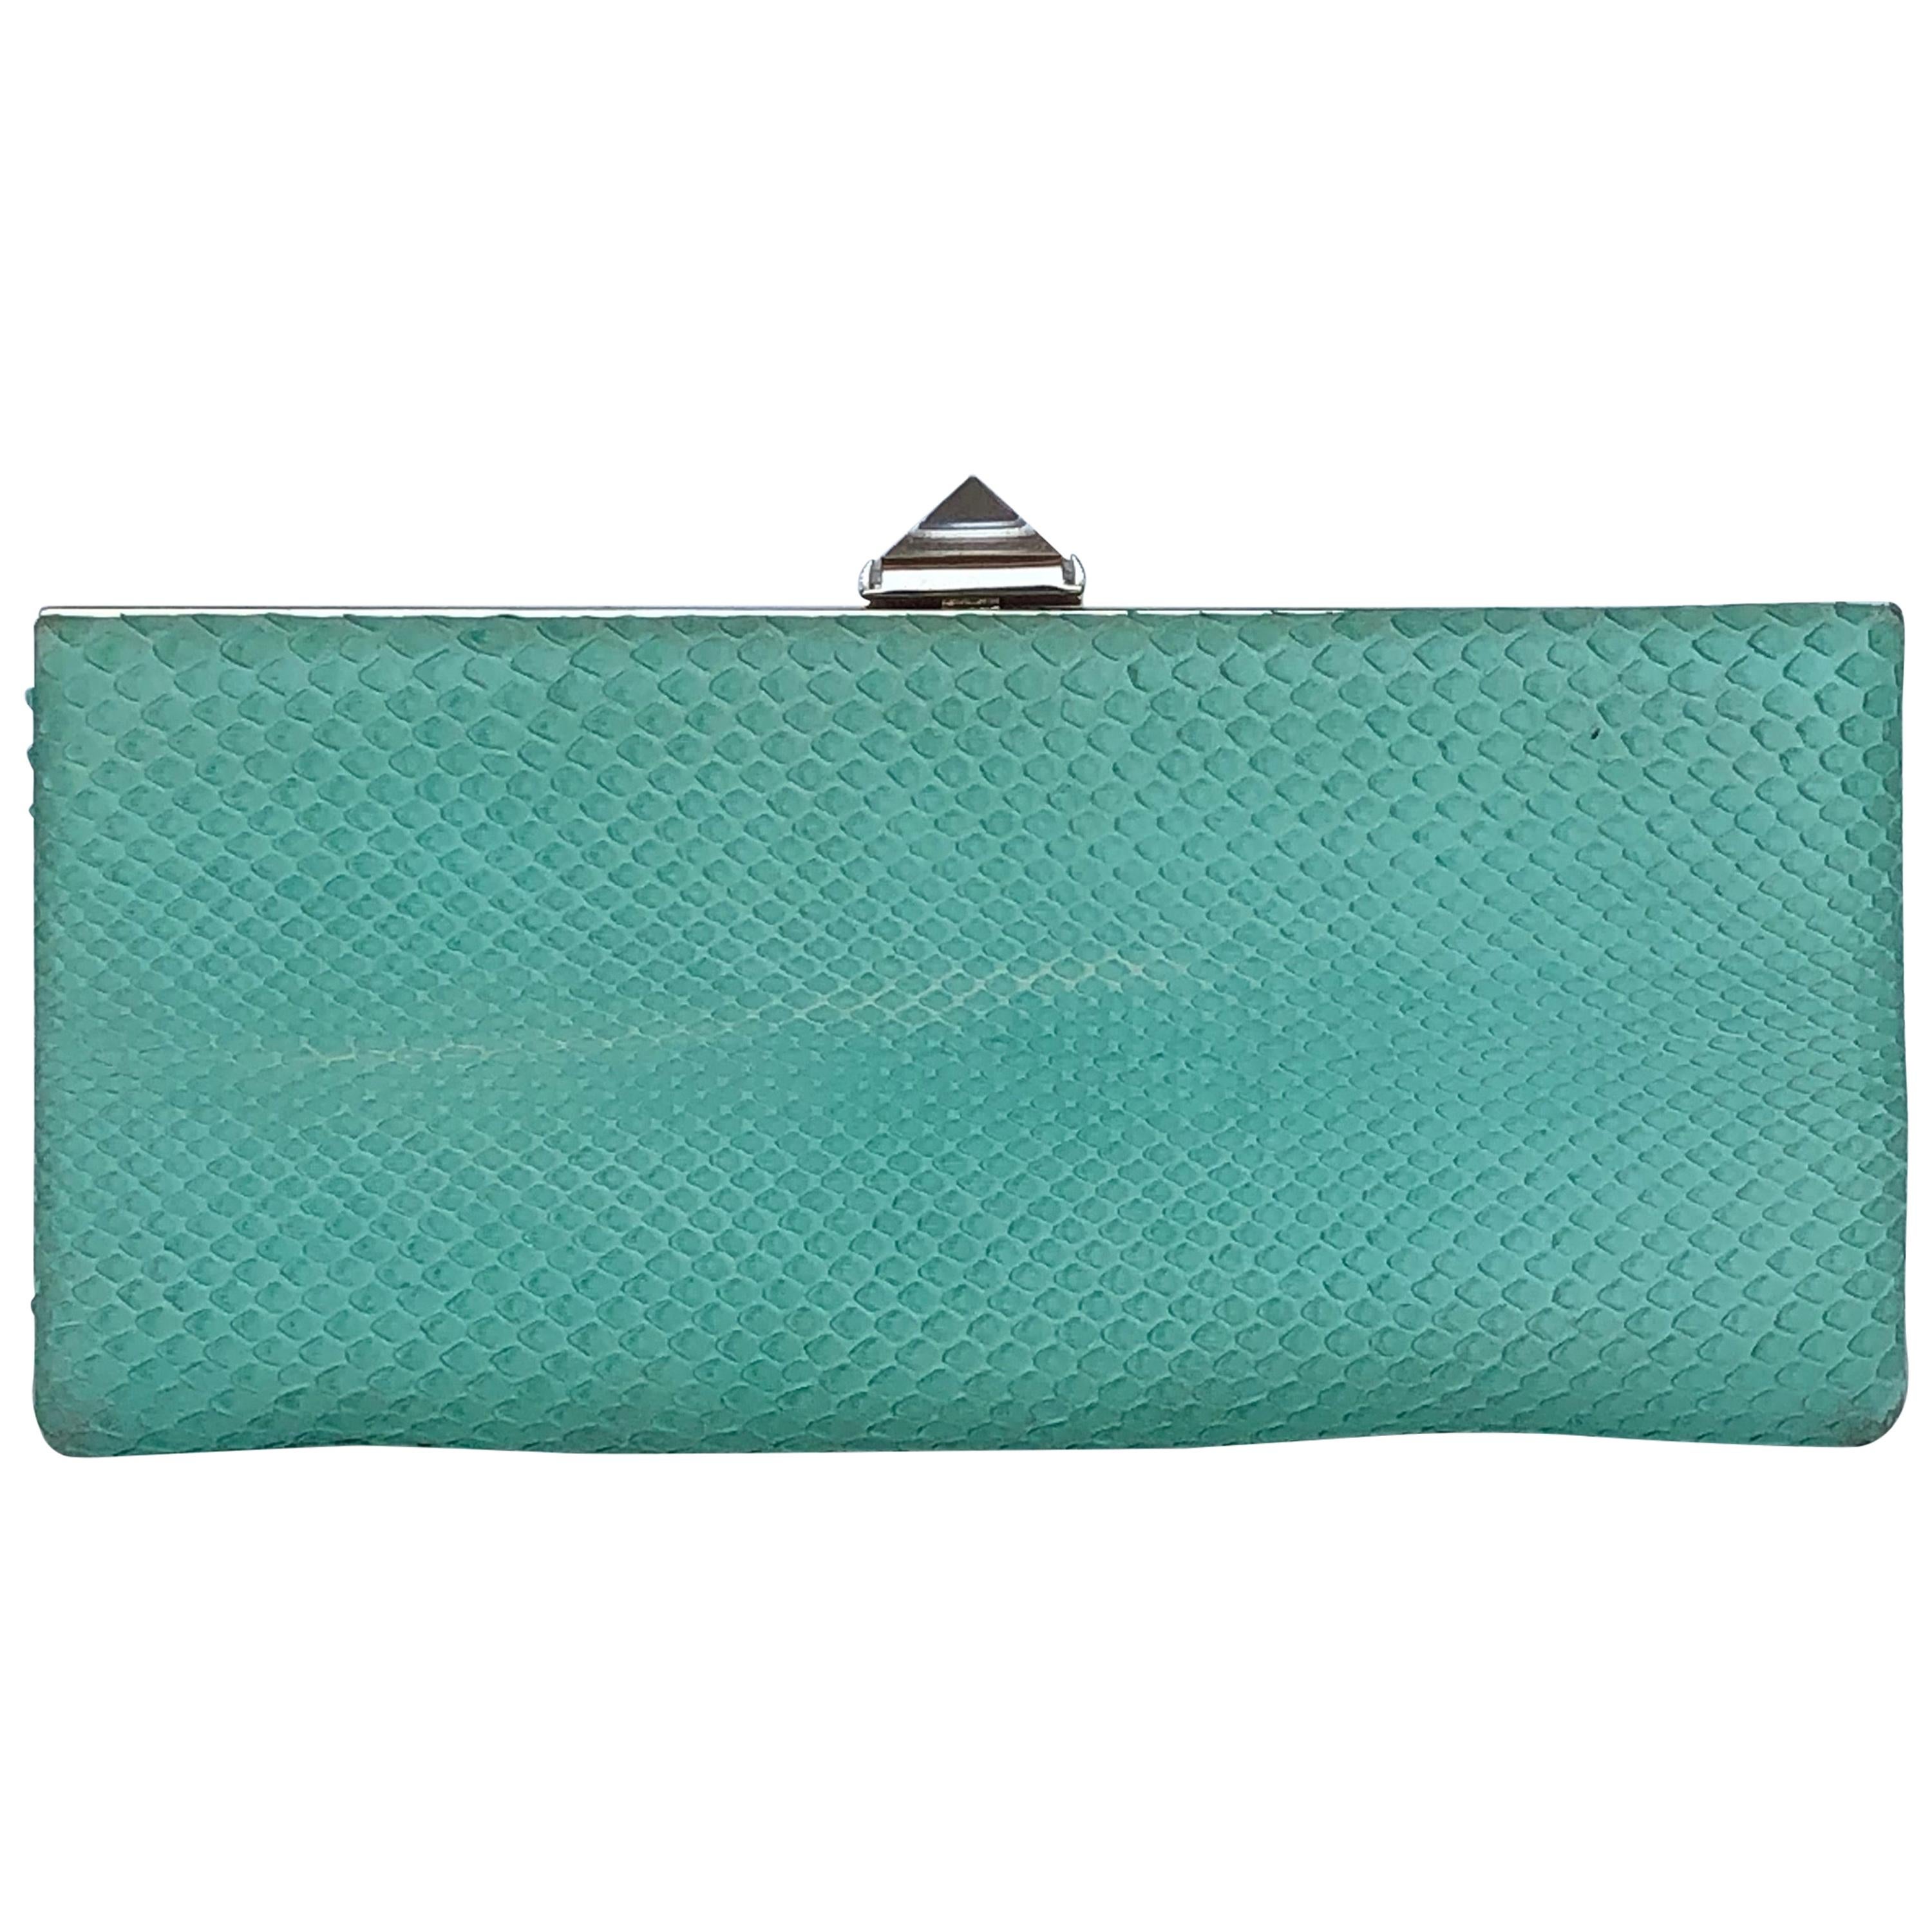 CHRISTIAN LOUBOUTIN mint snake pyramid stud crystal evening clutch For Sale